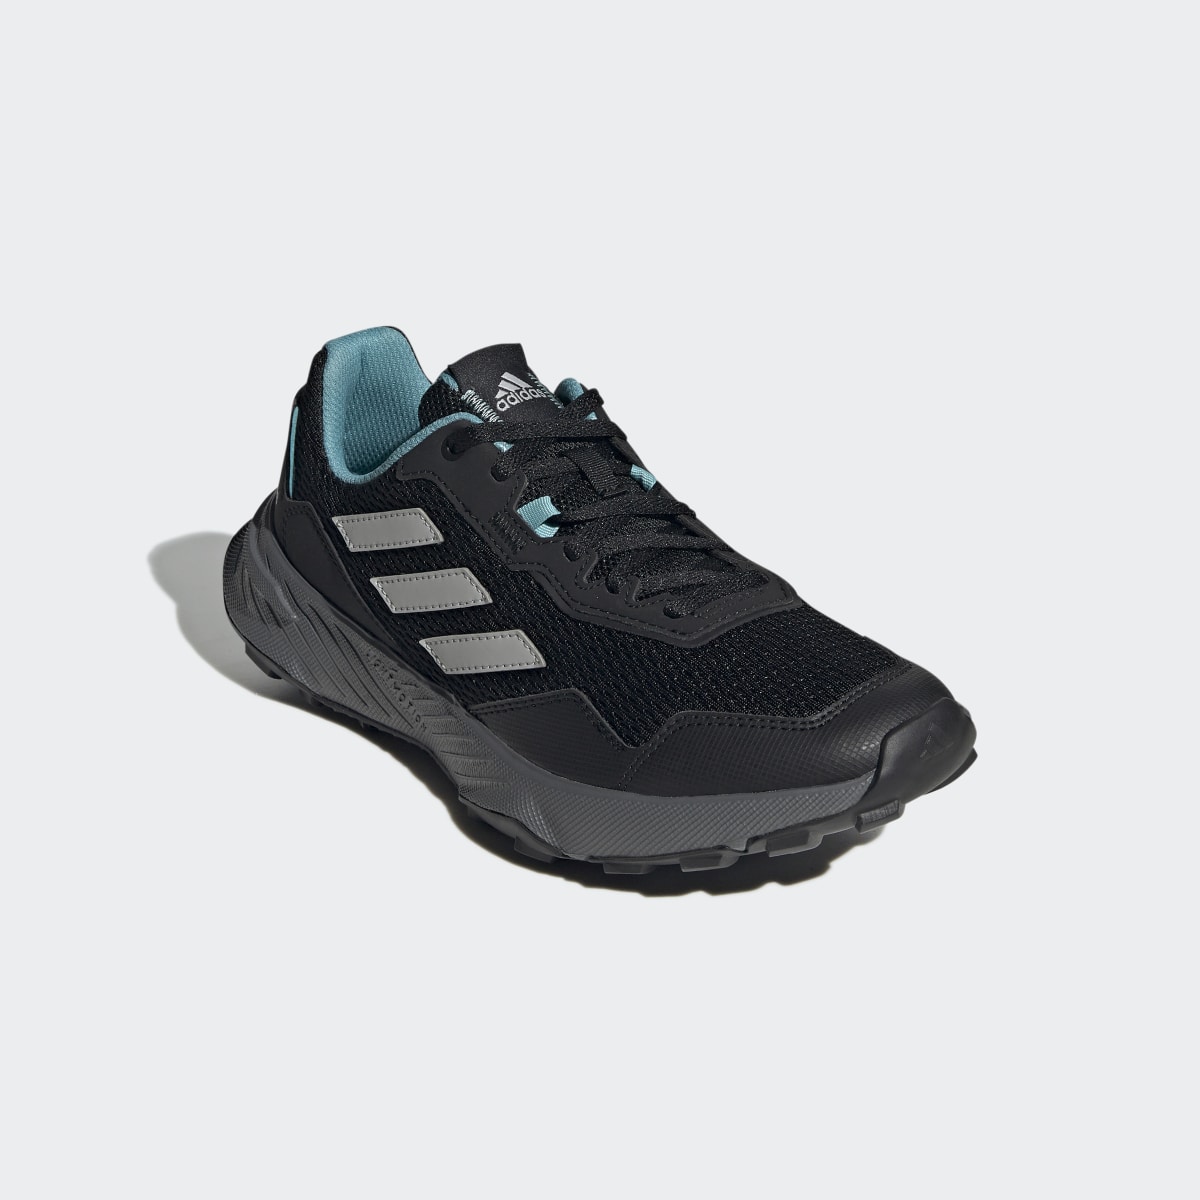 Adidas Tracefinder Trail Running Shoes. 5